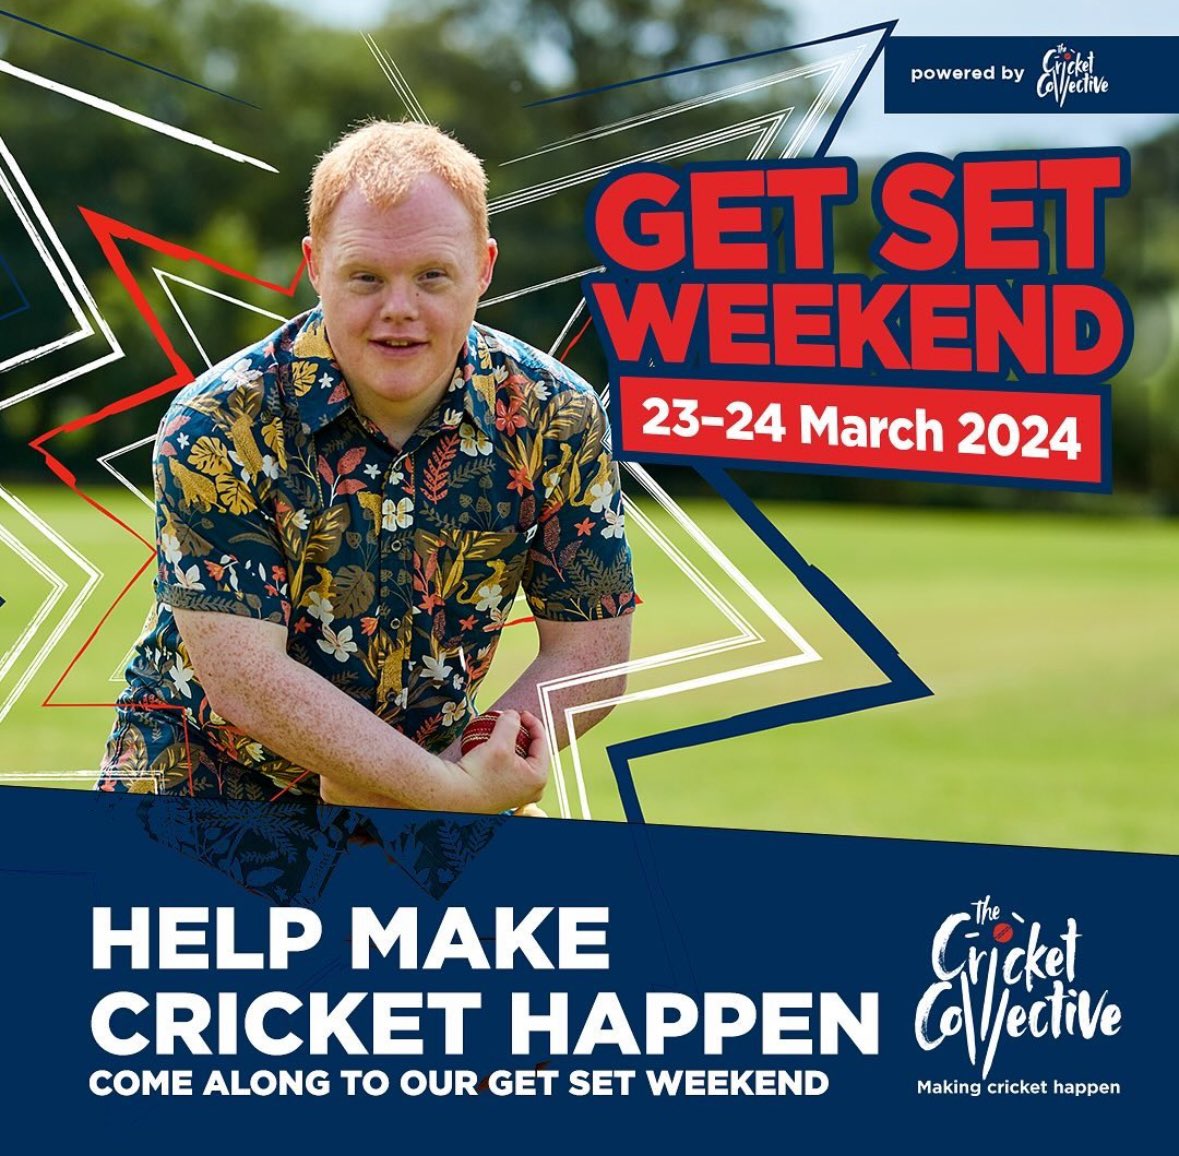 We wish all clubs across Yorkshire good weather for this years ECB Get Set Weekend ☀️ Please tag us in any posts so we can see all the hard work that will take place across Yorkshire this weekend 🏏 #getsetweekend